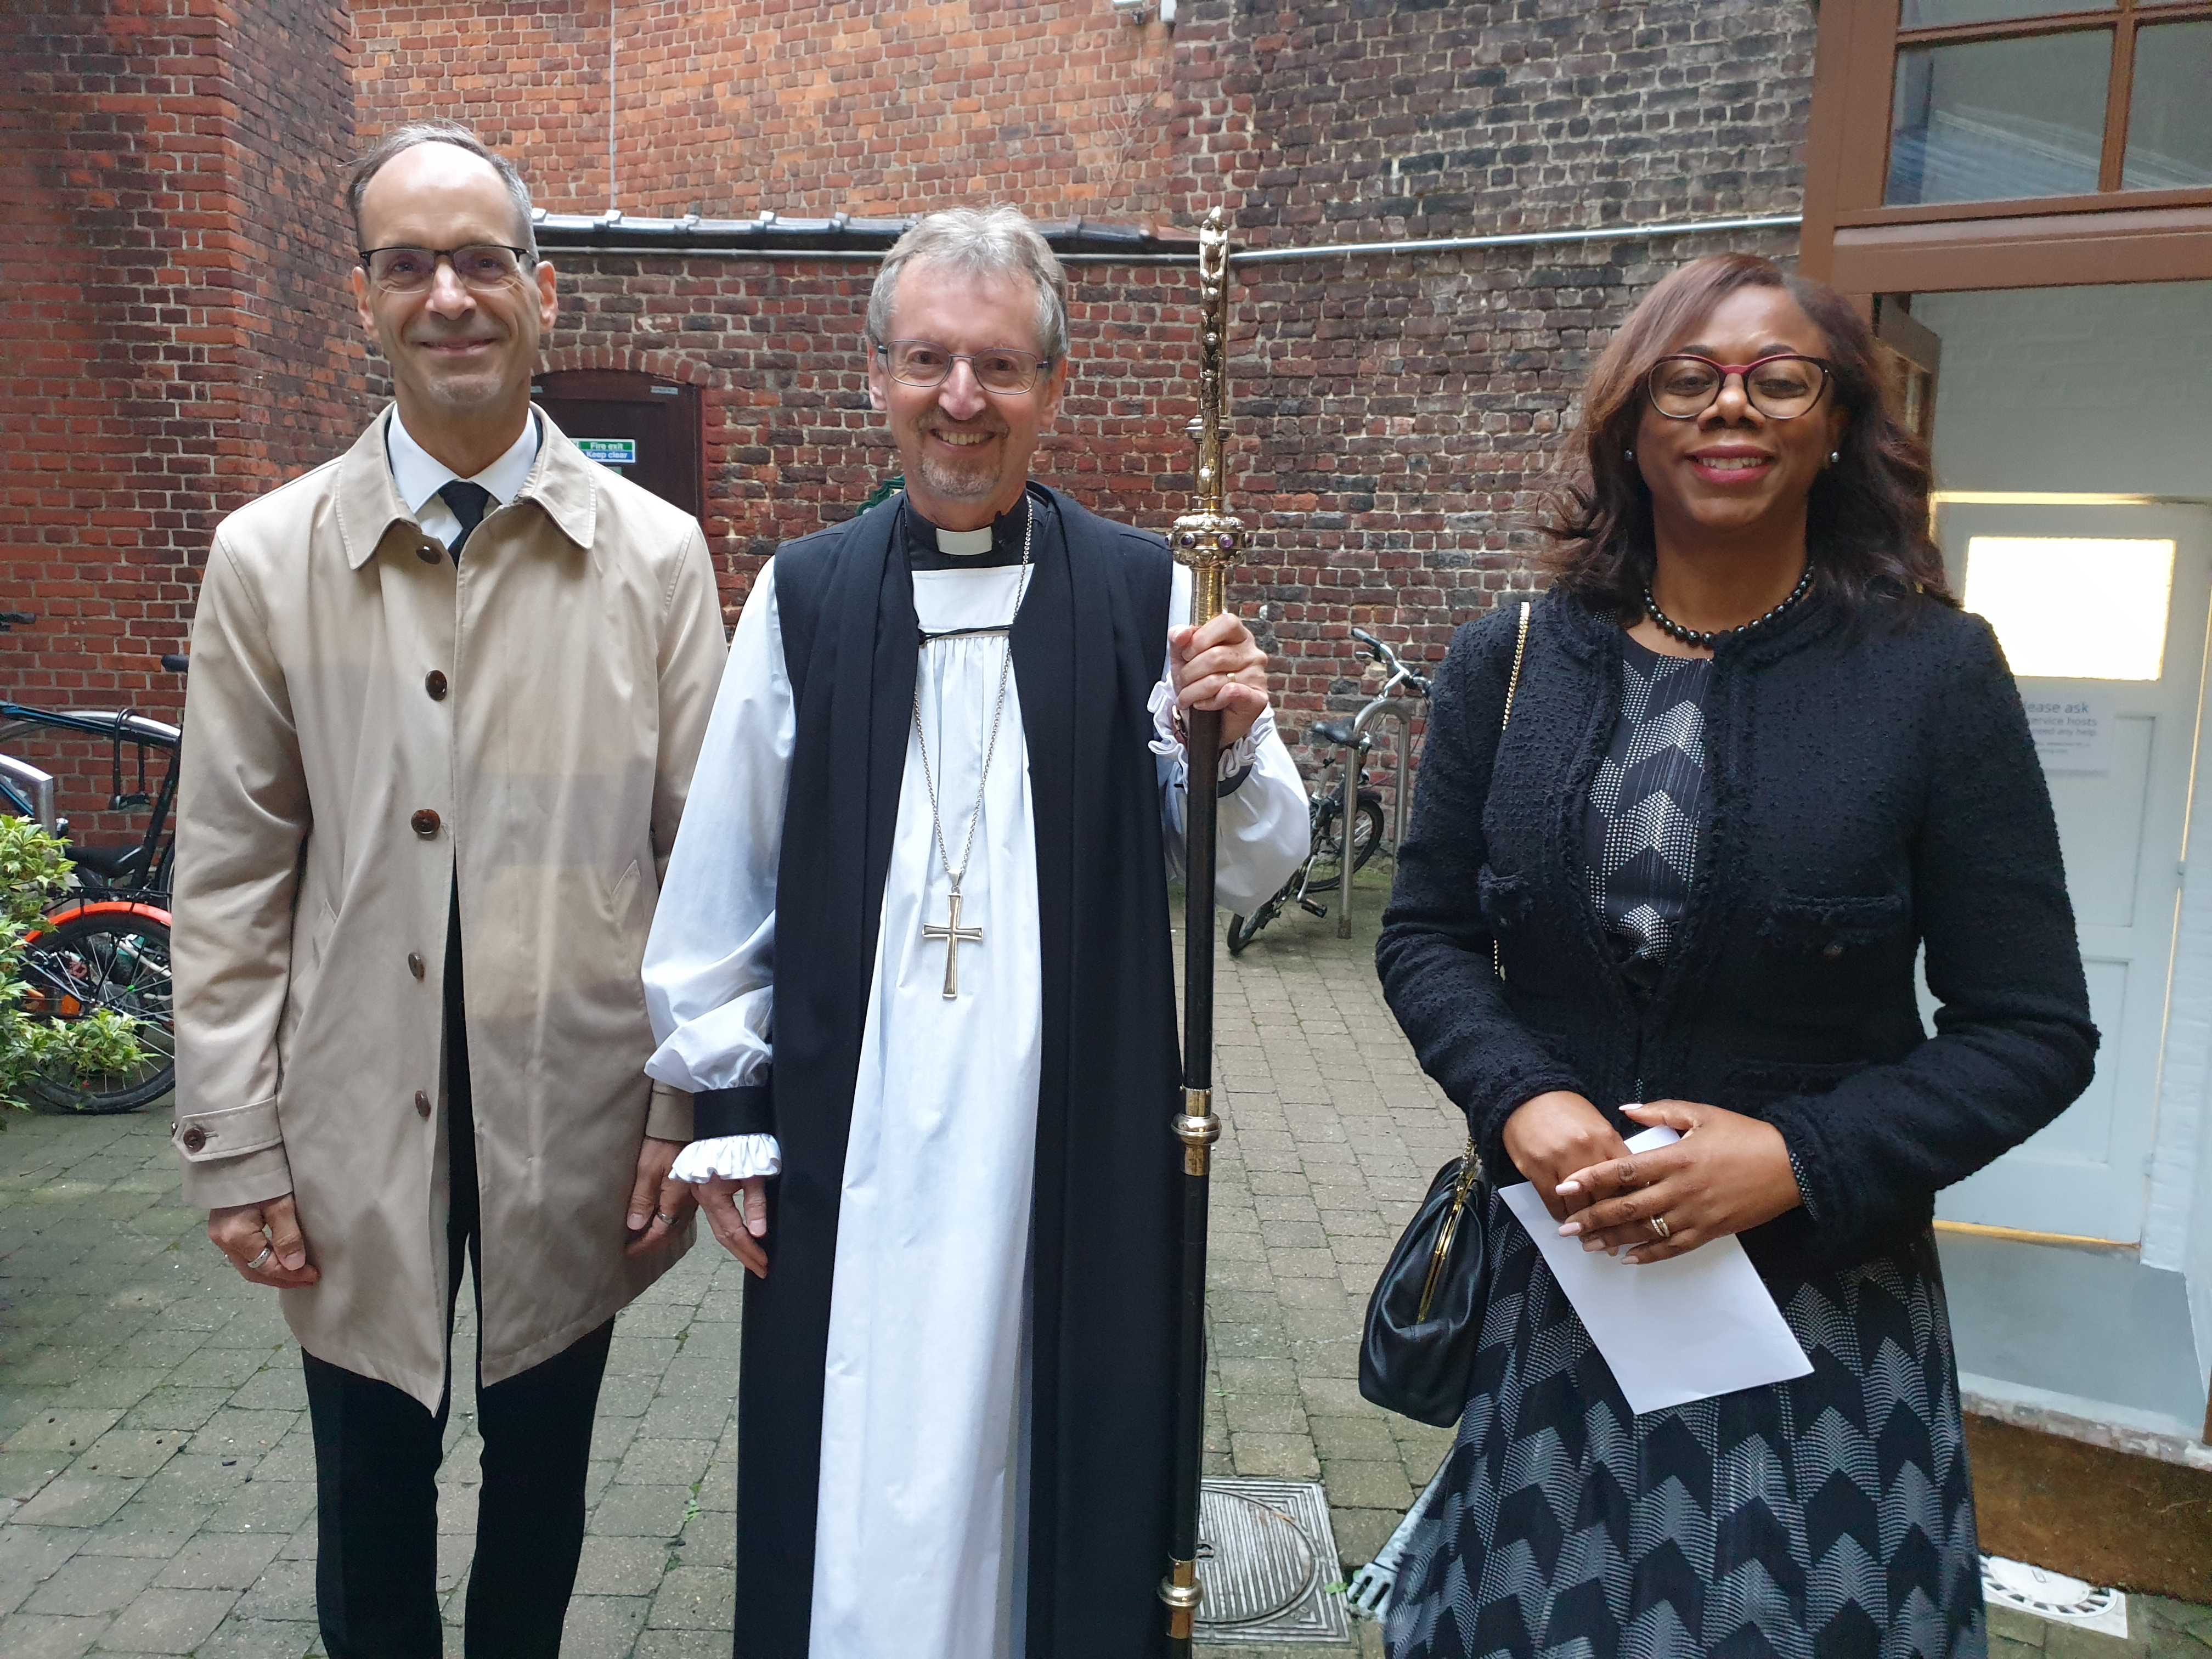 Bishop robert and others at a memorial service for the Queen.